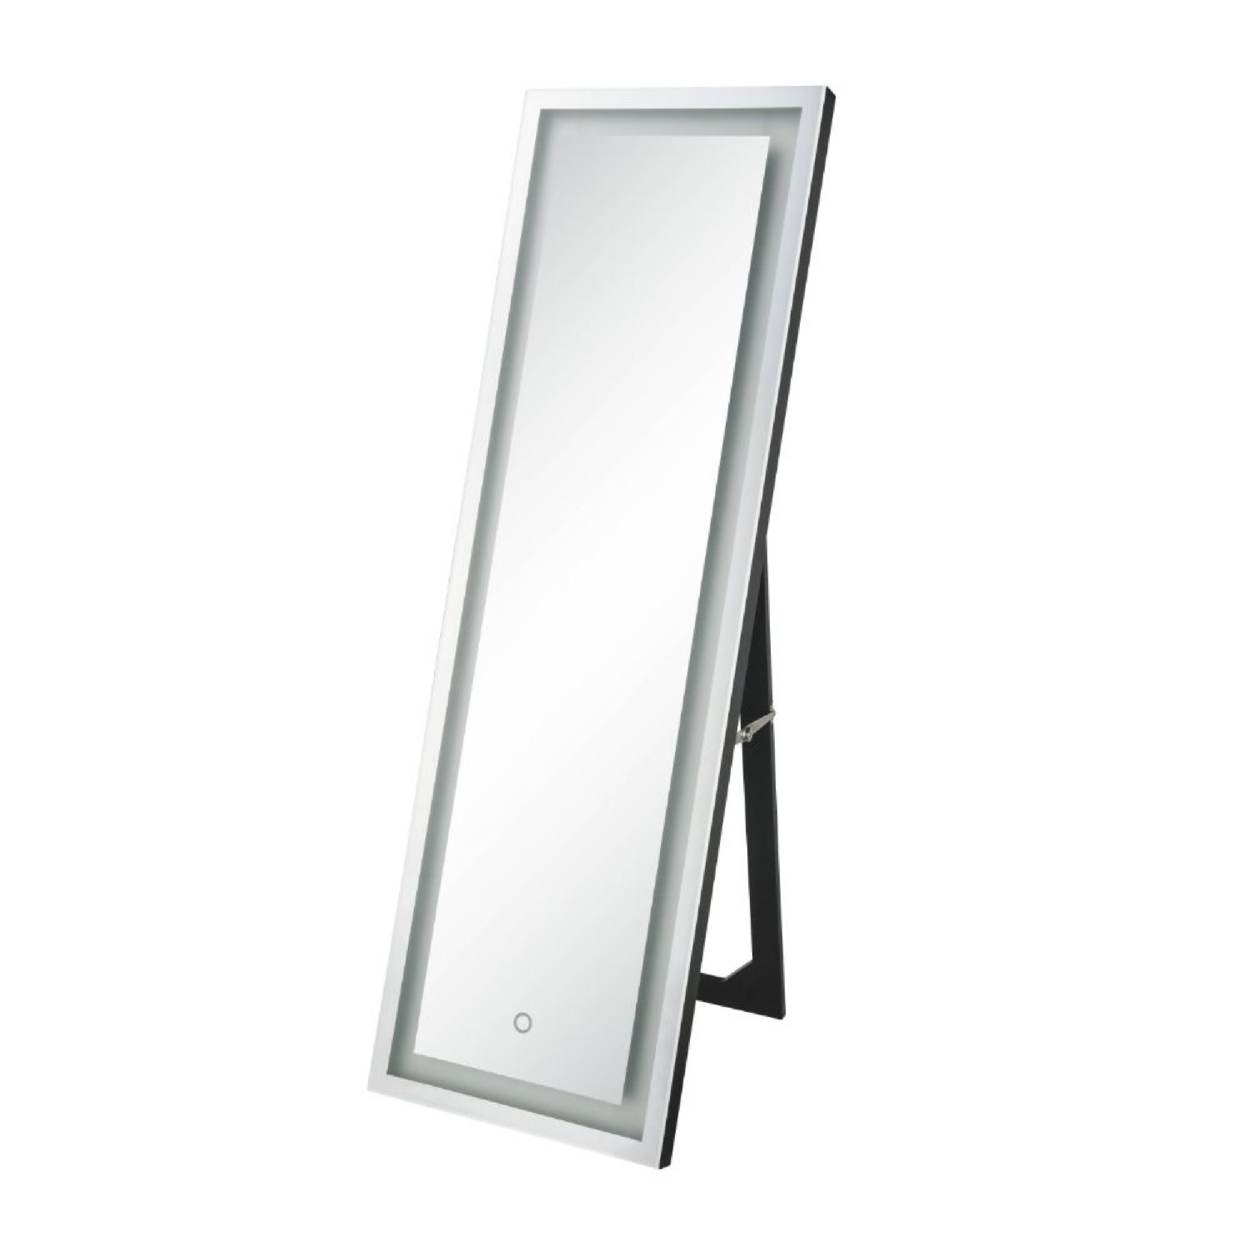 Floor Mirror With LED Touch Light And Rectangular Shape, Silver- Saltoro Sherpi